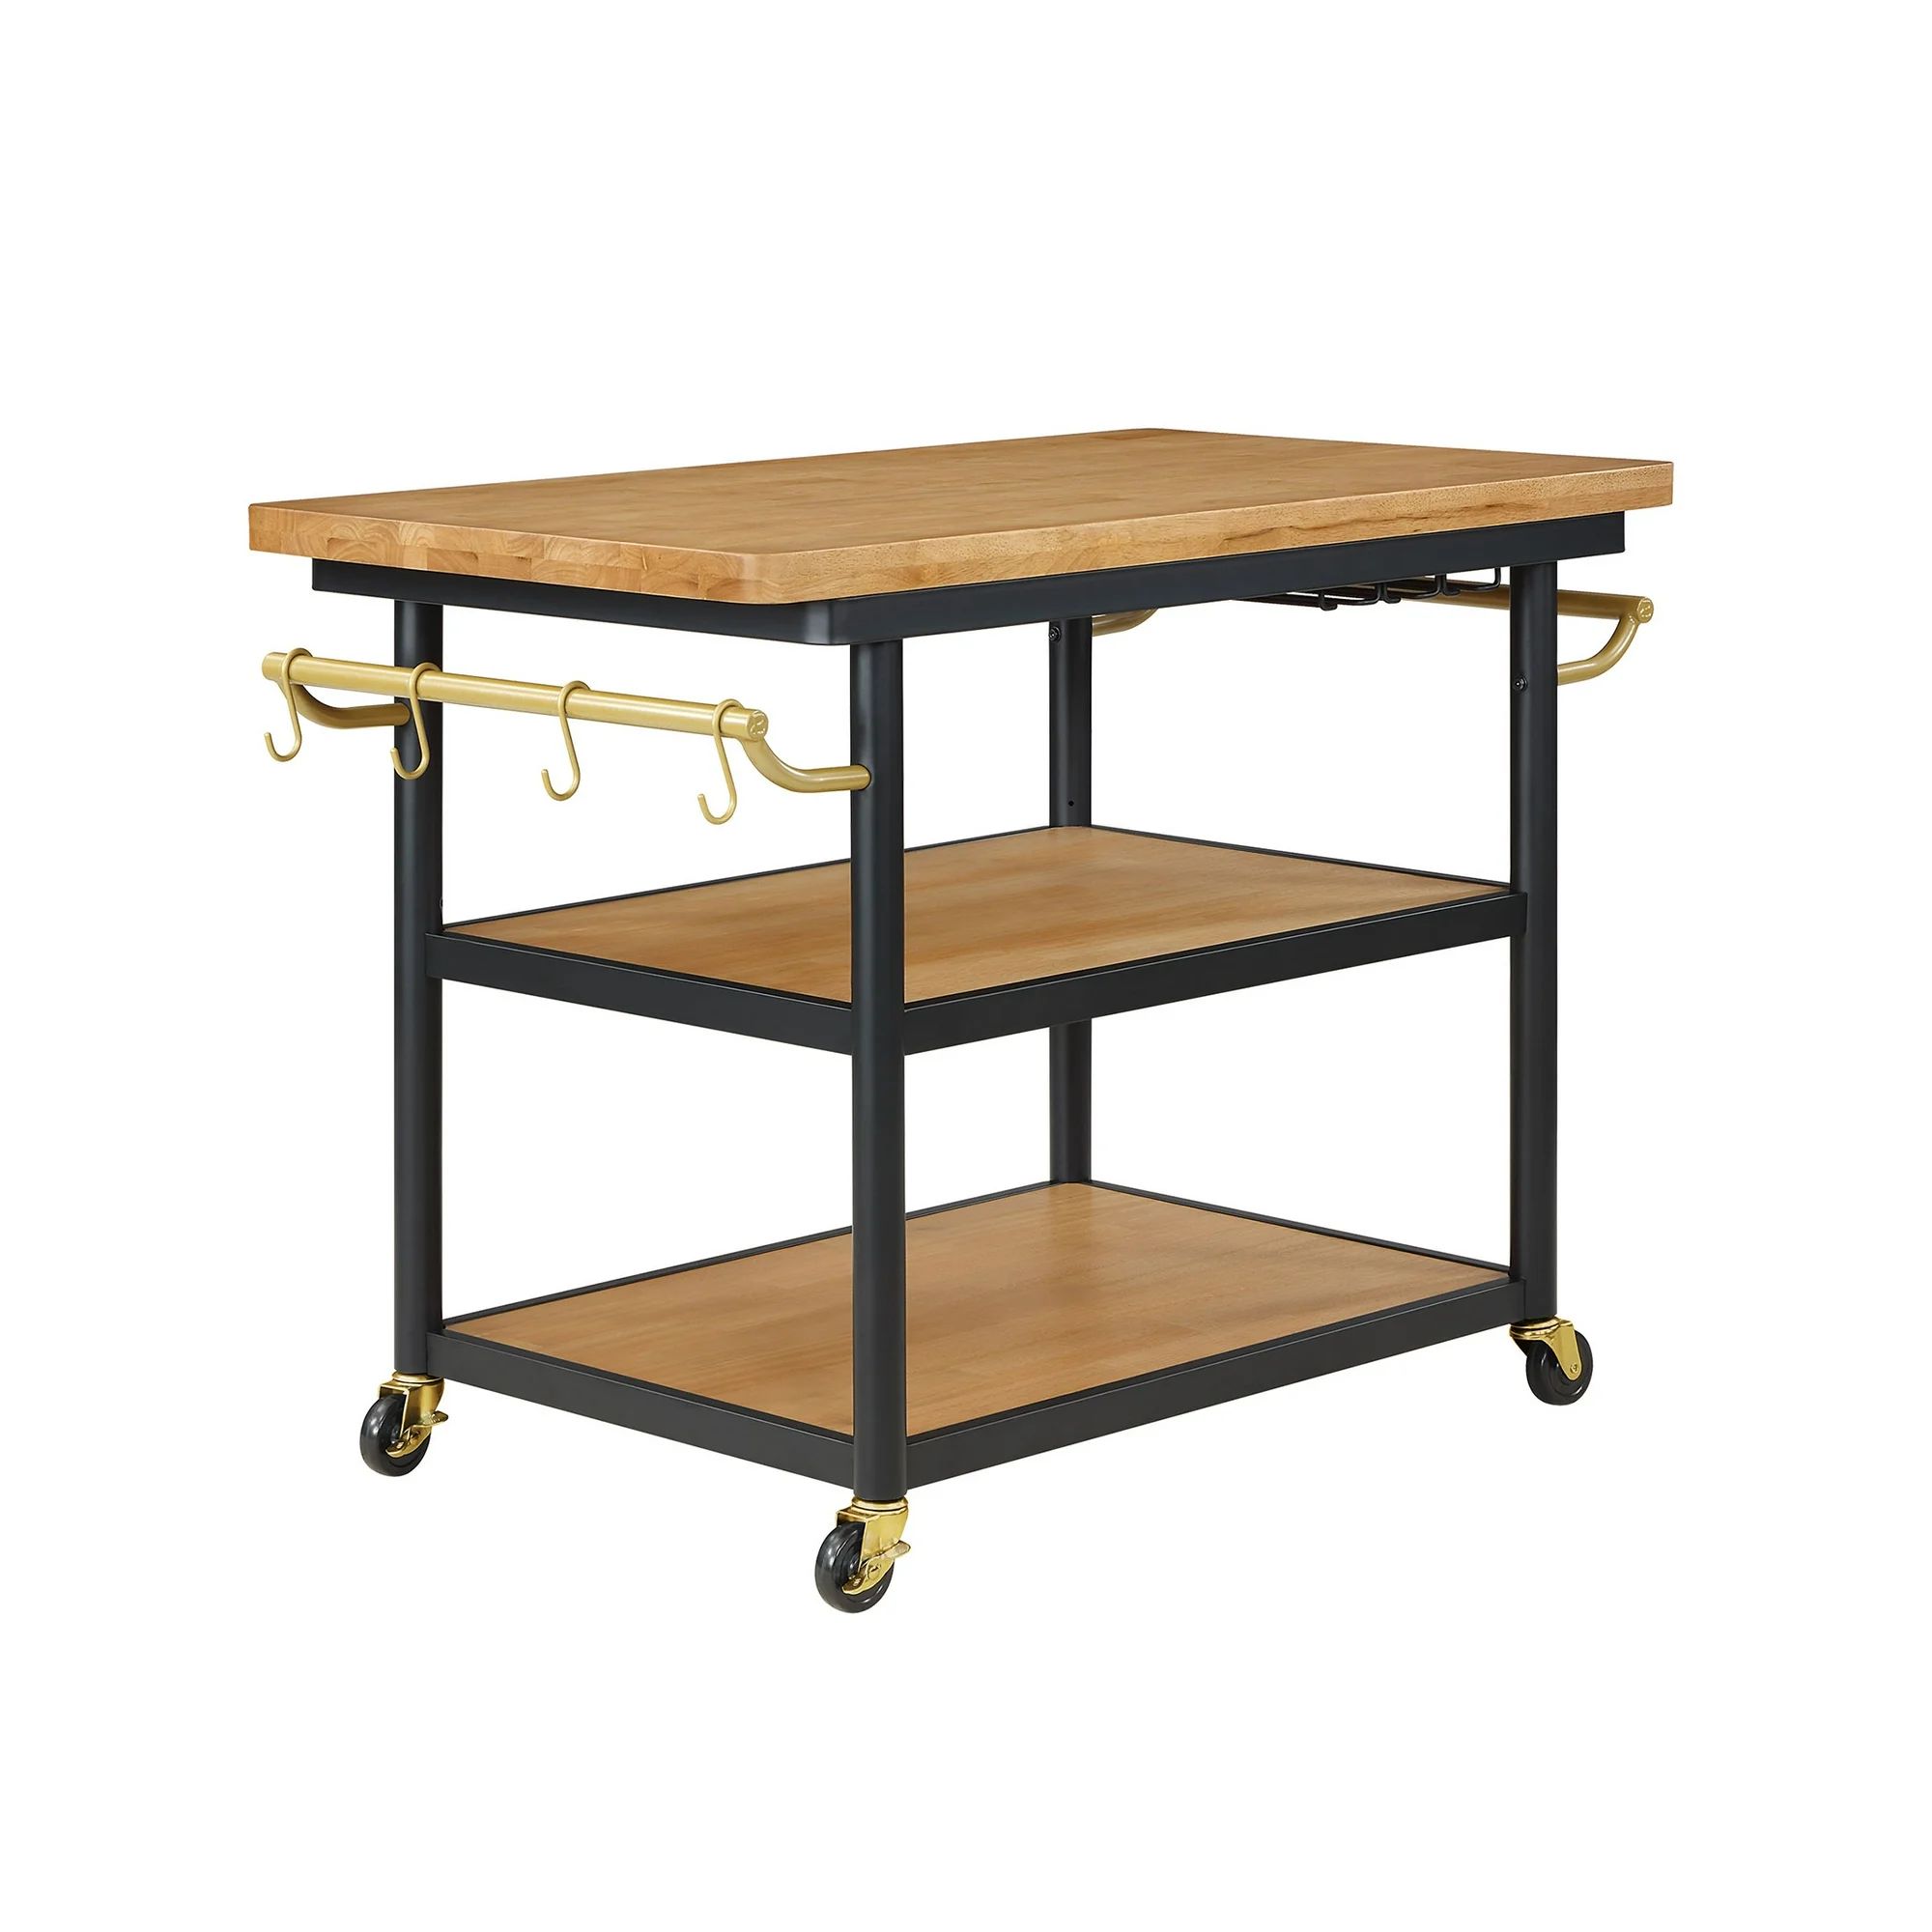 Beautiful Wheeled Kitchen Cart with 2 lower shelves by Drew Barrymore, Black Finish | Walmart (US)